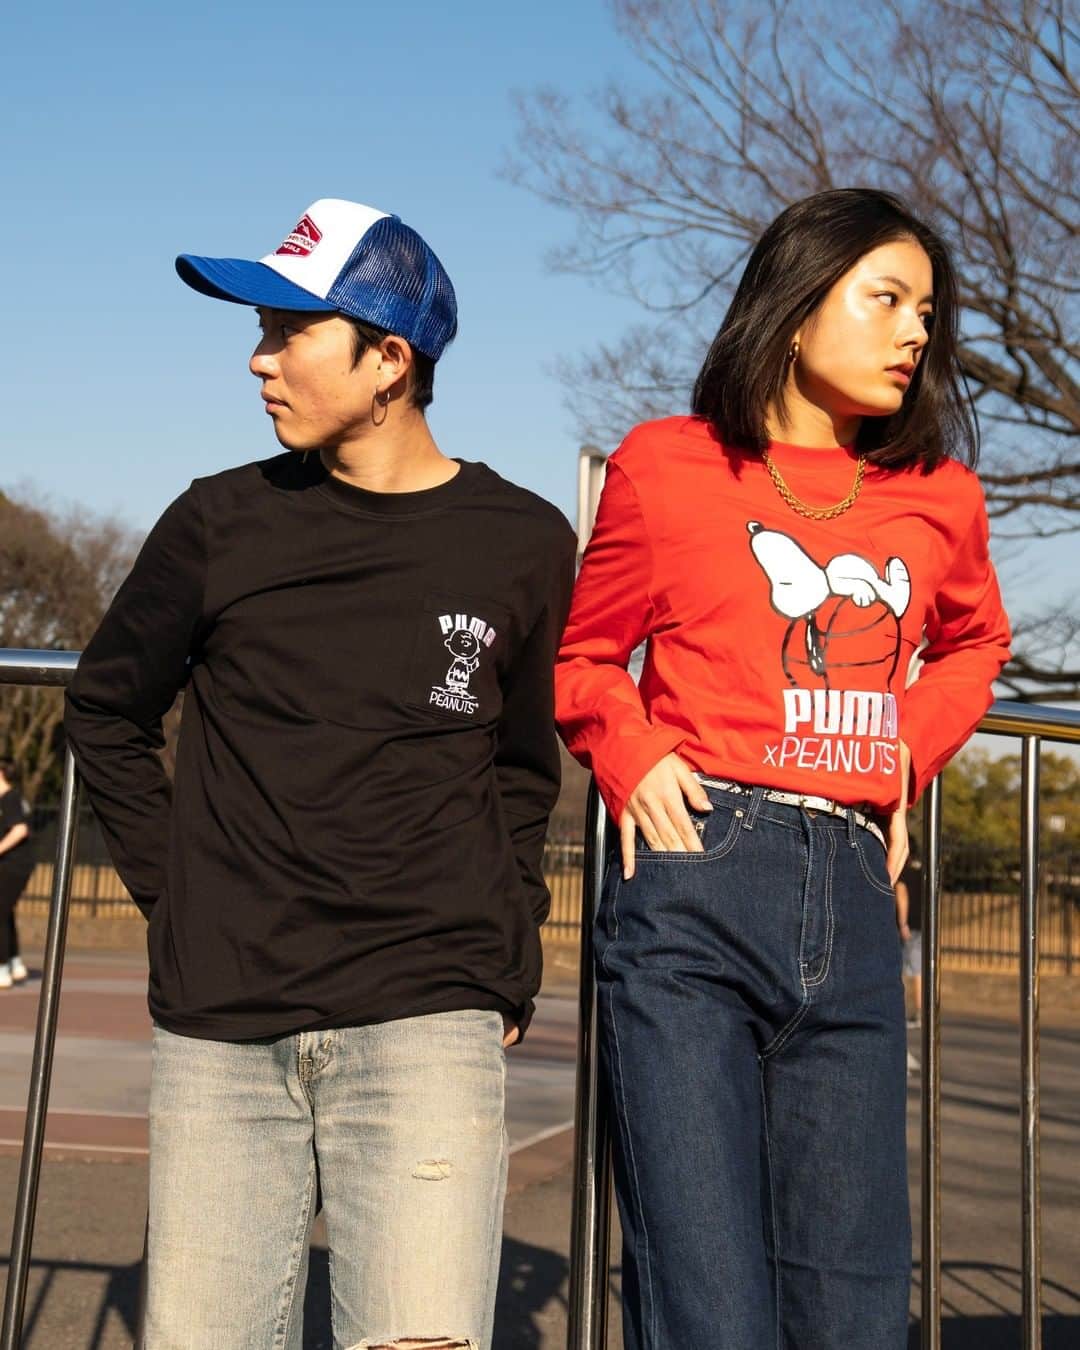 アトモスさんのインスタグラム写真 - (アトモスInstagram)「. 2/6(SAT)よりPUMA × PEANUTS Collectionが登場。 "PEANUTS"は1950年より新聞の4コマ漫画として連載がスタートされ、2020年で70周年を迎える漫画作品。総作品数は17897作、掲載された雑誌は2000を越え、世界75か国、21言語で3億5500万人以上の読者を持ち、コミック総発行部数は4億部を越えた他、数多くの賞を獲得するなど人気を誇っている。今回はそんなPEANUTSとのタイアップコレクション。作品内に登場するキャラクターがPUMAの関連するスポーツとリンクしたグラフィックを採用しデザインに落とし込まれている。最も重要なキャラクターである スヌーピー、チャーリー・ブラウンが採用されたアイテムは可愛げがありながらも、カルチャーシーンに溶け込んだ仕上がりとなっている。 . PUMA x PEANUTS Collection will be released from 2/6 (SAT). "PEANUTS" is a manga work that started serialization as a four-frame manga in newspapers in 1950 and will celebrate its 70th anniversary in 2020. The total number of works is 17897, the number of magazines published exceeds 2000, the readership is more than 355 million in 21 languages ​​in 75 countries around the world, the total circulation of comics exceeds 400 million, and many others. It is very popular, such as winning an award. This time is a tie-up collection with such PEANUTS. The characters appearing in the work are incorporated into the design by adopting graphics linked to PUMA's related sports. The items featuring the most important characters, Snoopy and Charlie Brown, are cute yet blended into the culture scene. .. #puma #atmos #peanuts #snoopy #charliebrown #アトモス #プーマ」1月31日 15時01分 - atmos_japan